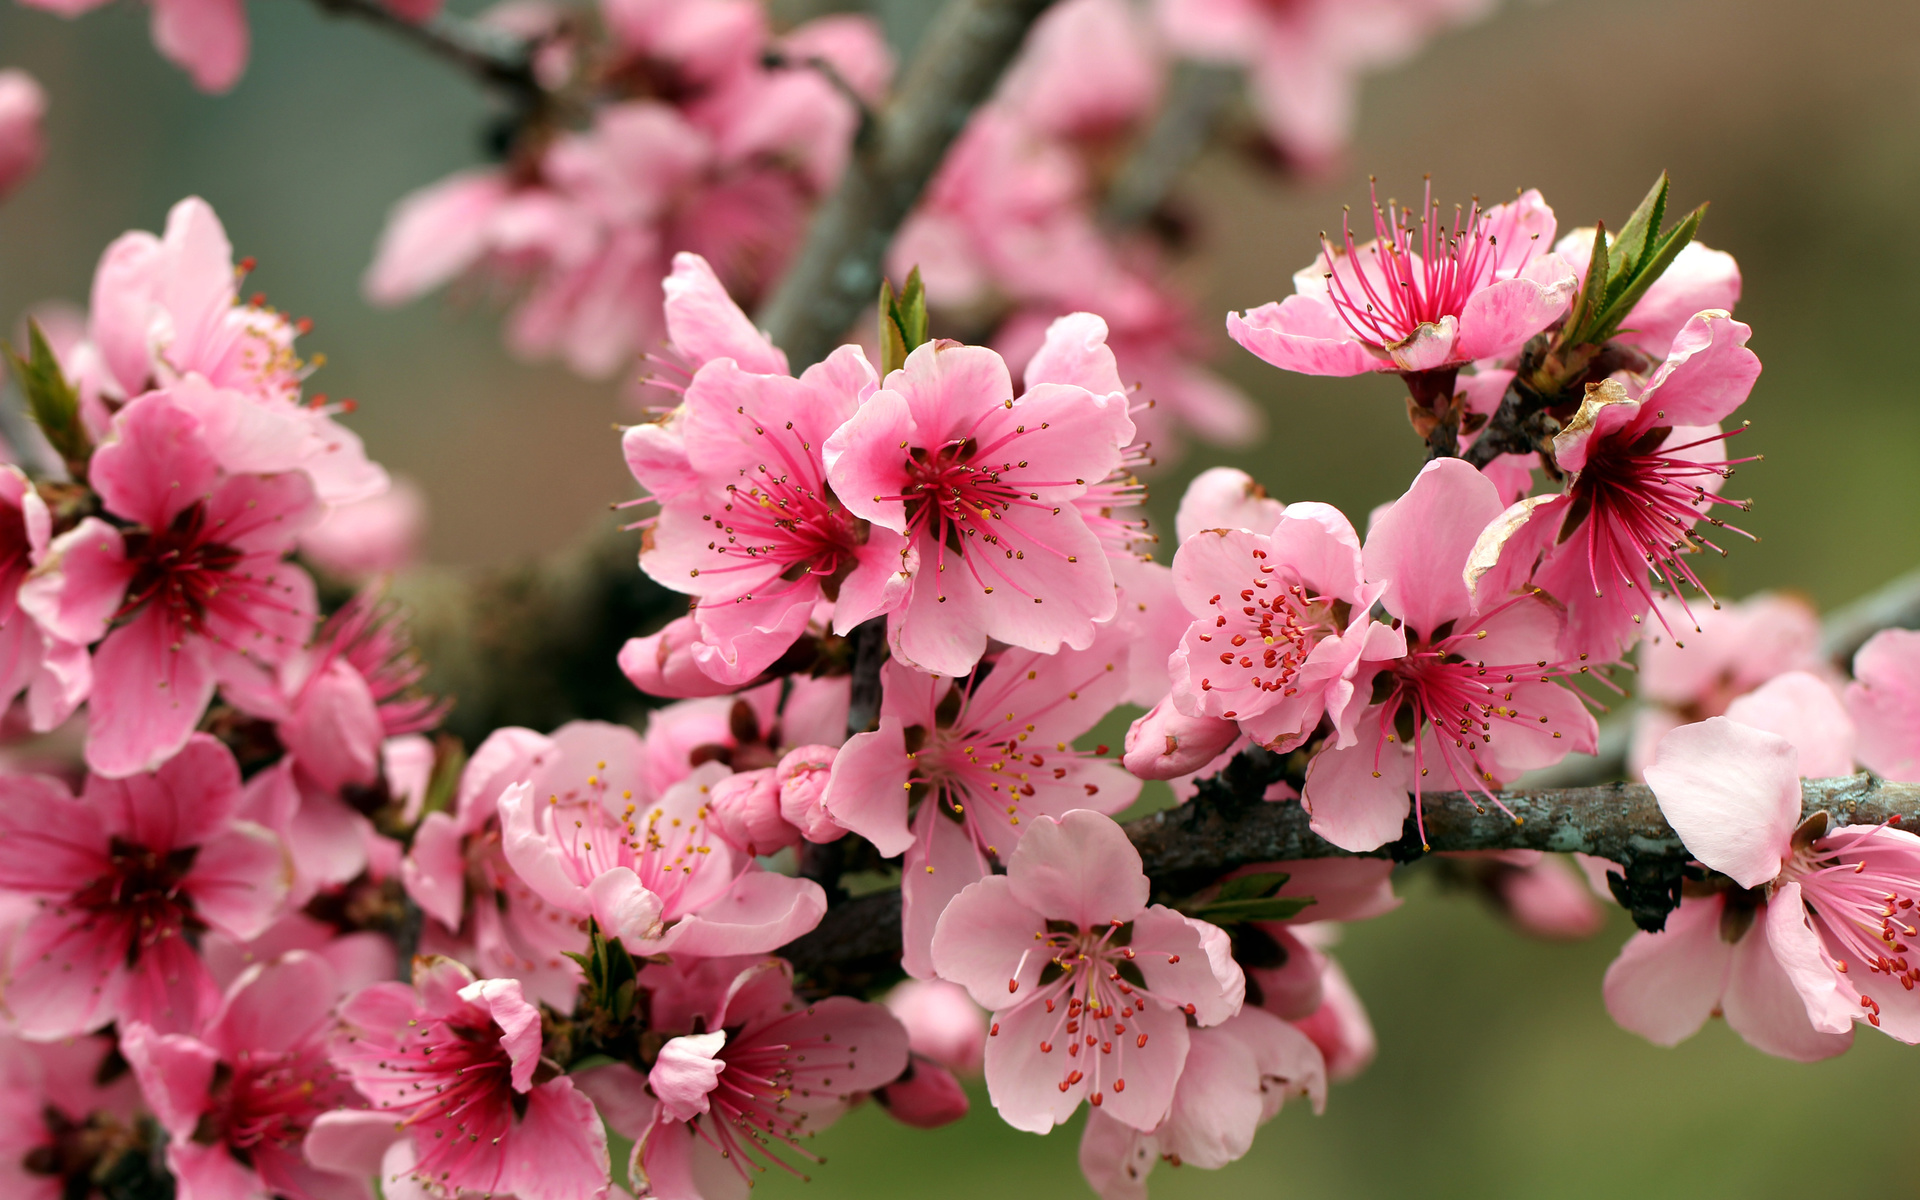 Spring, pink, flowers, branch, petals, apple tree, leaves, bright, tender, beauty, blossoms